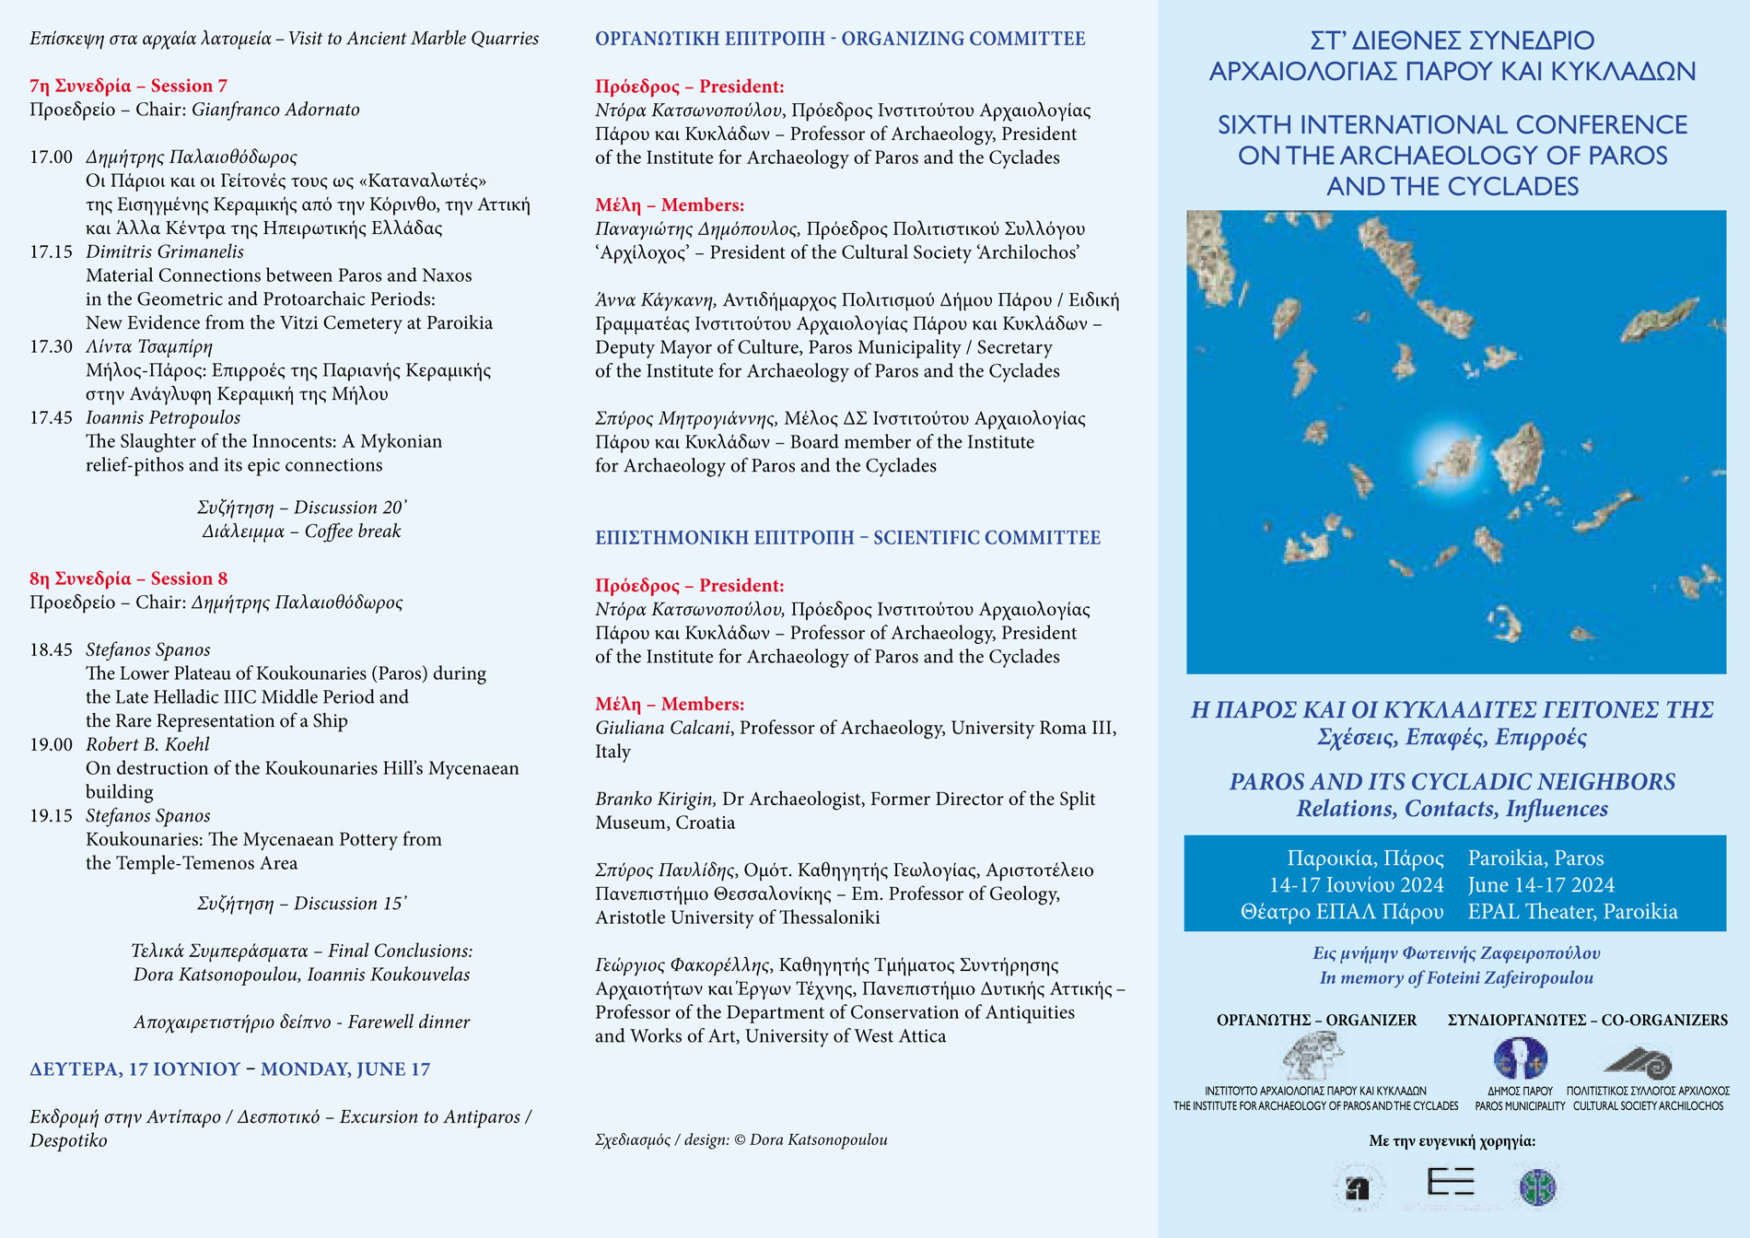 Sixth International Conference on the Archaeology of Paros and the Cyclades